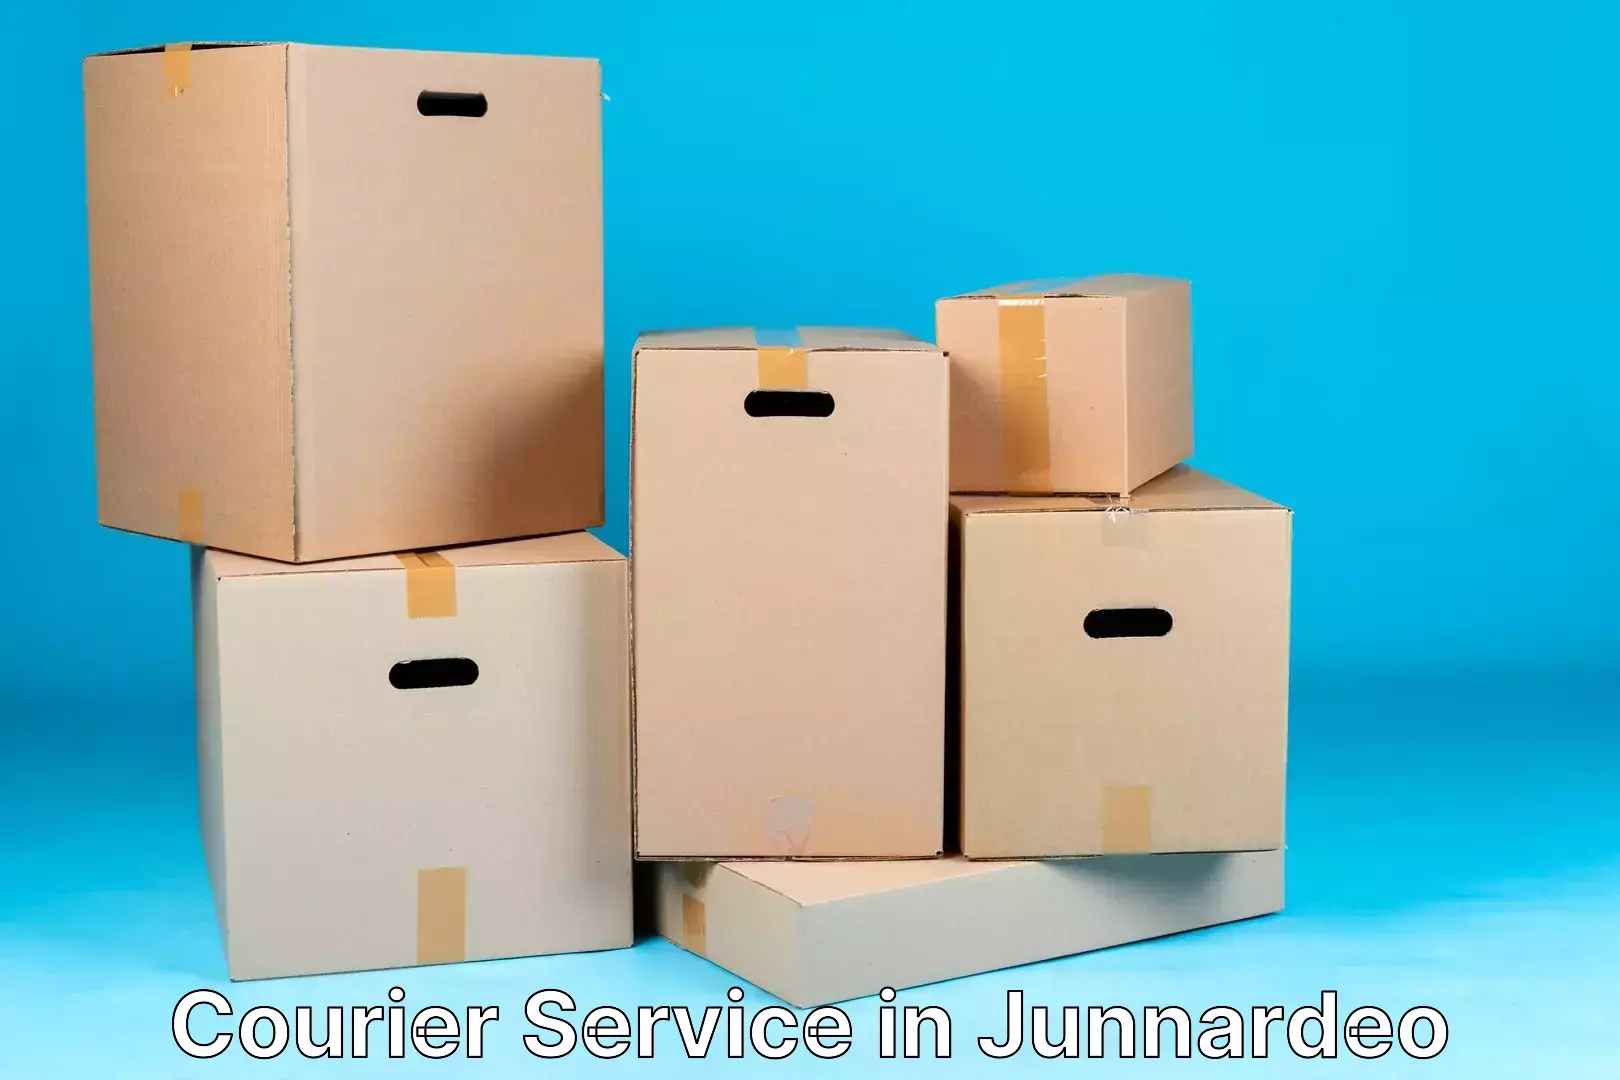 User-friendly courier app in Junnardeo